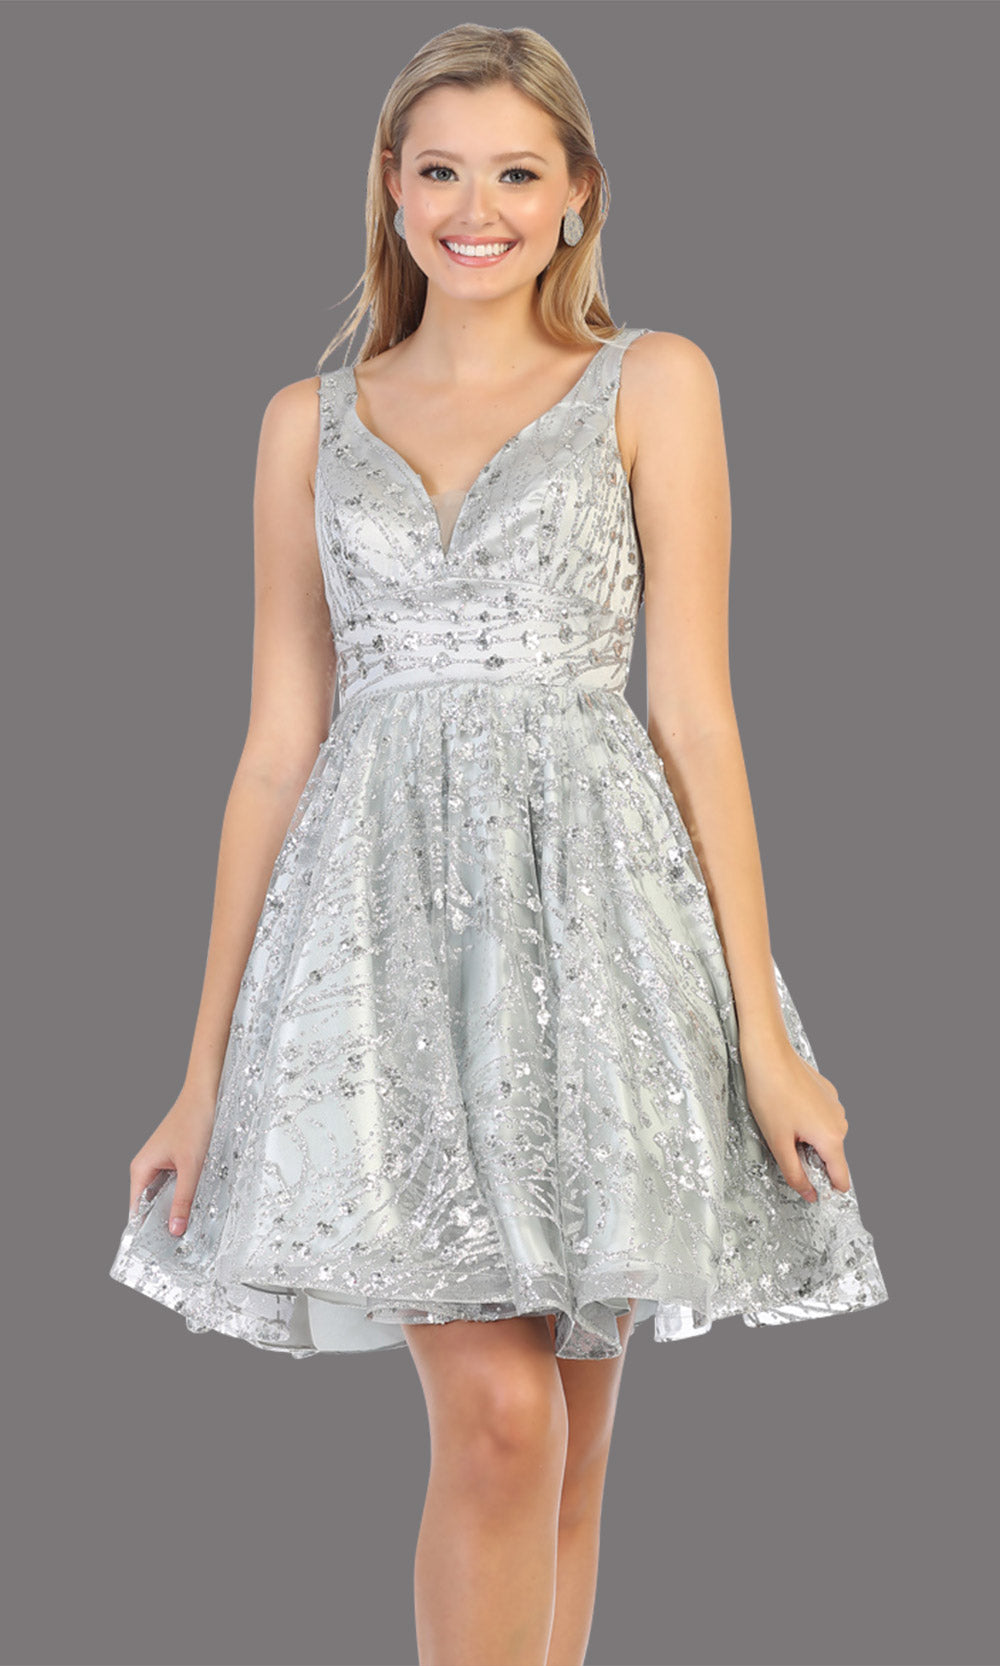 Mayqueen Mq1702 short v neck silver flowy glittery grade 8 graduation dress. This light grey shiny party dress with wide straps is perfect for prom, graduation, grade 8 grad, confirmation dress, bat mitzvah dress, damas. Plus sizes avail.jpggrade 8 grad dresses, graduation dresses